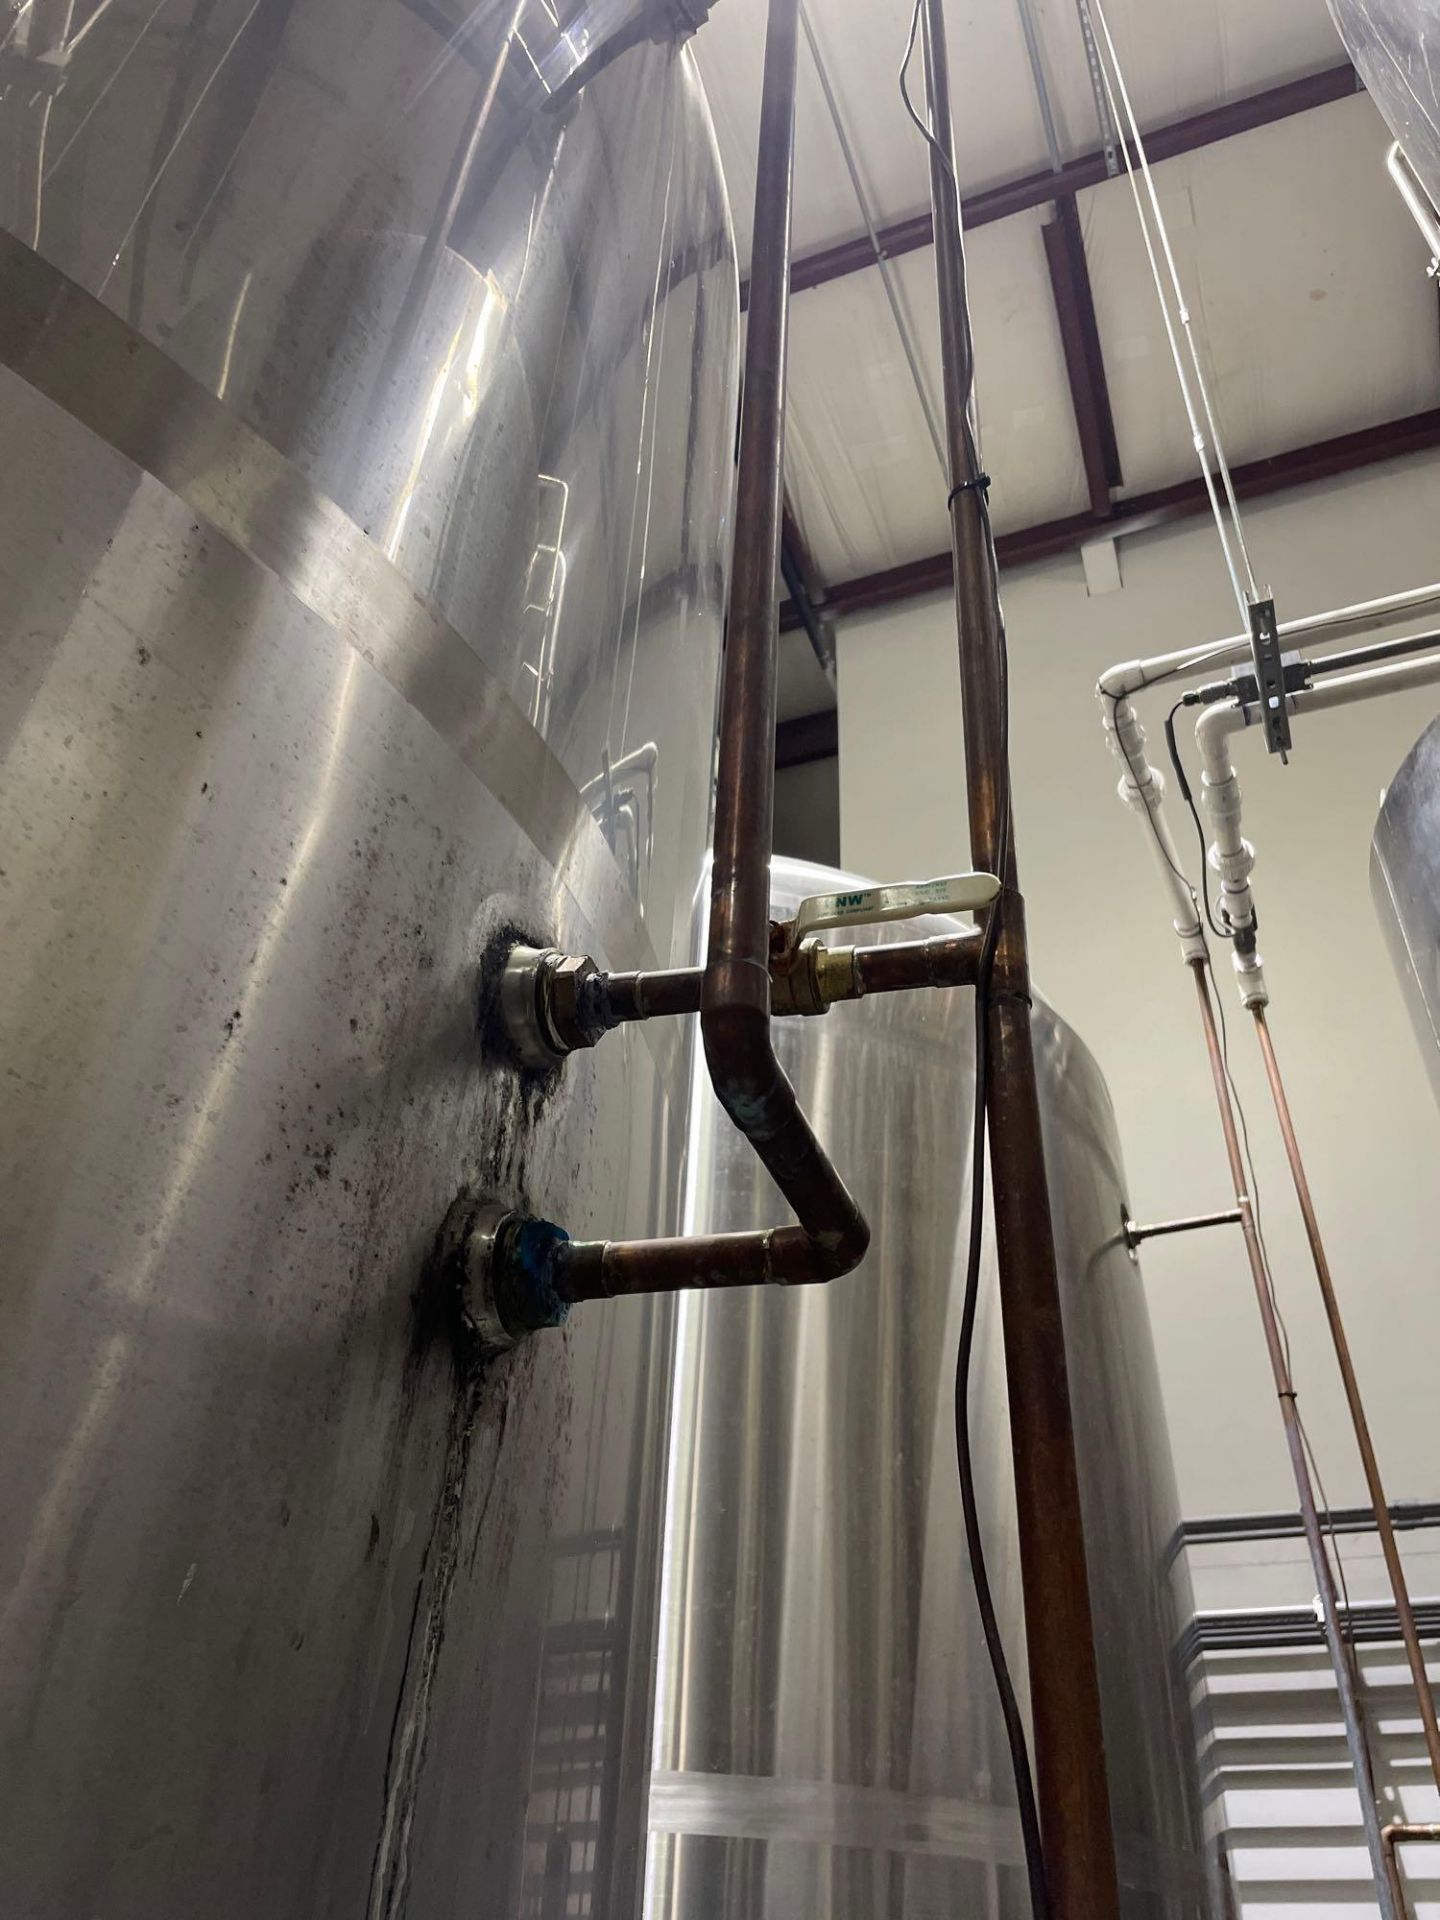 50 BBL SS Fermentation Vessel, Glycol Jacketed - Image 5 of 6